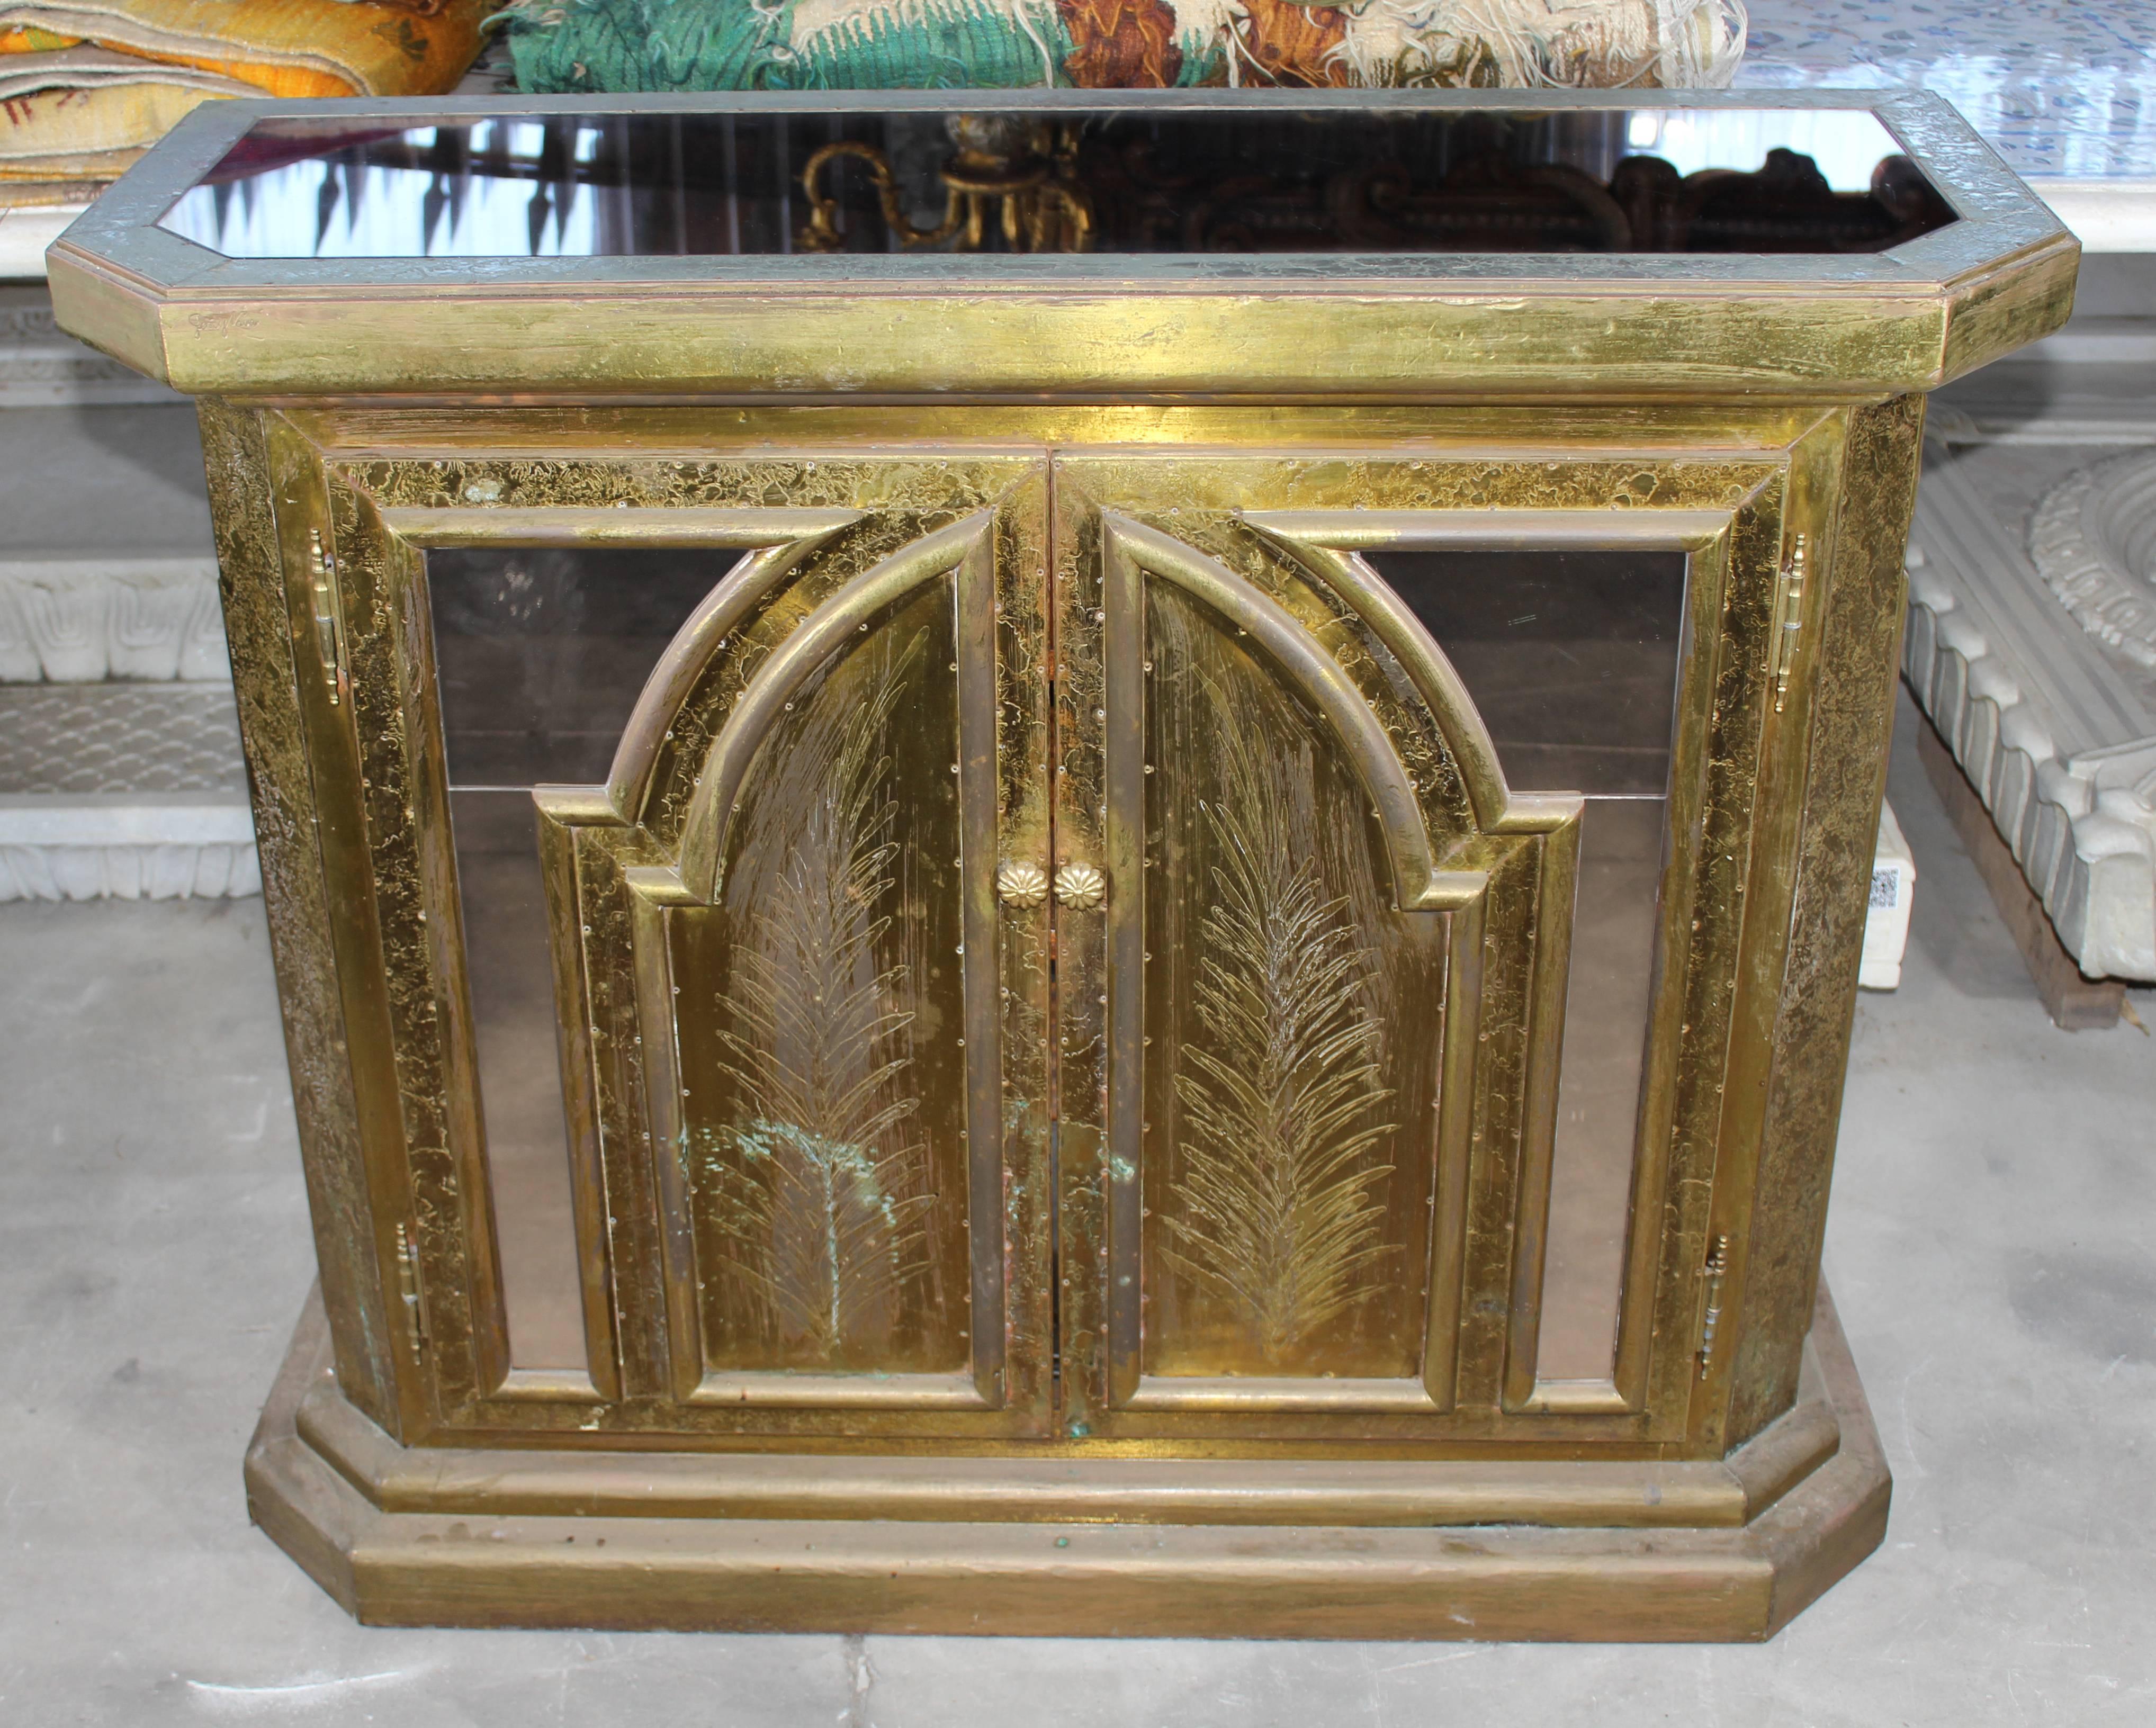 Two-door cabinet handcrafted in the 1980s shaping gilded brass over a wooden frame. Simple geometric style with oriental accents combining smoked glass in doors and top.